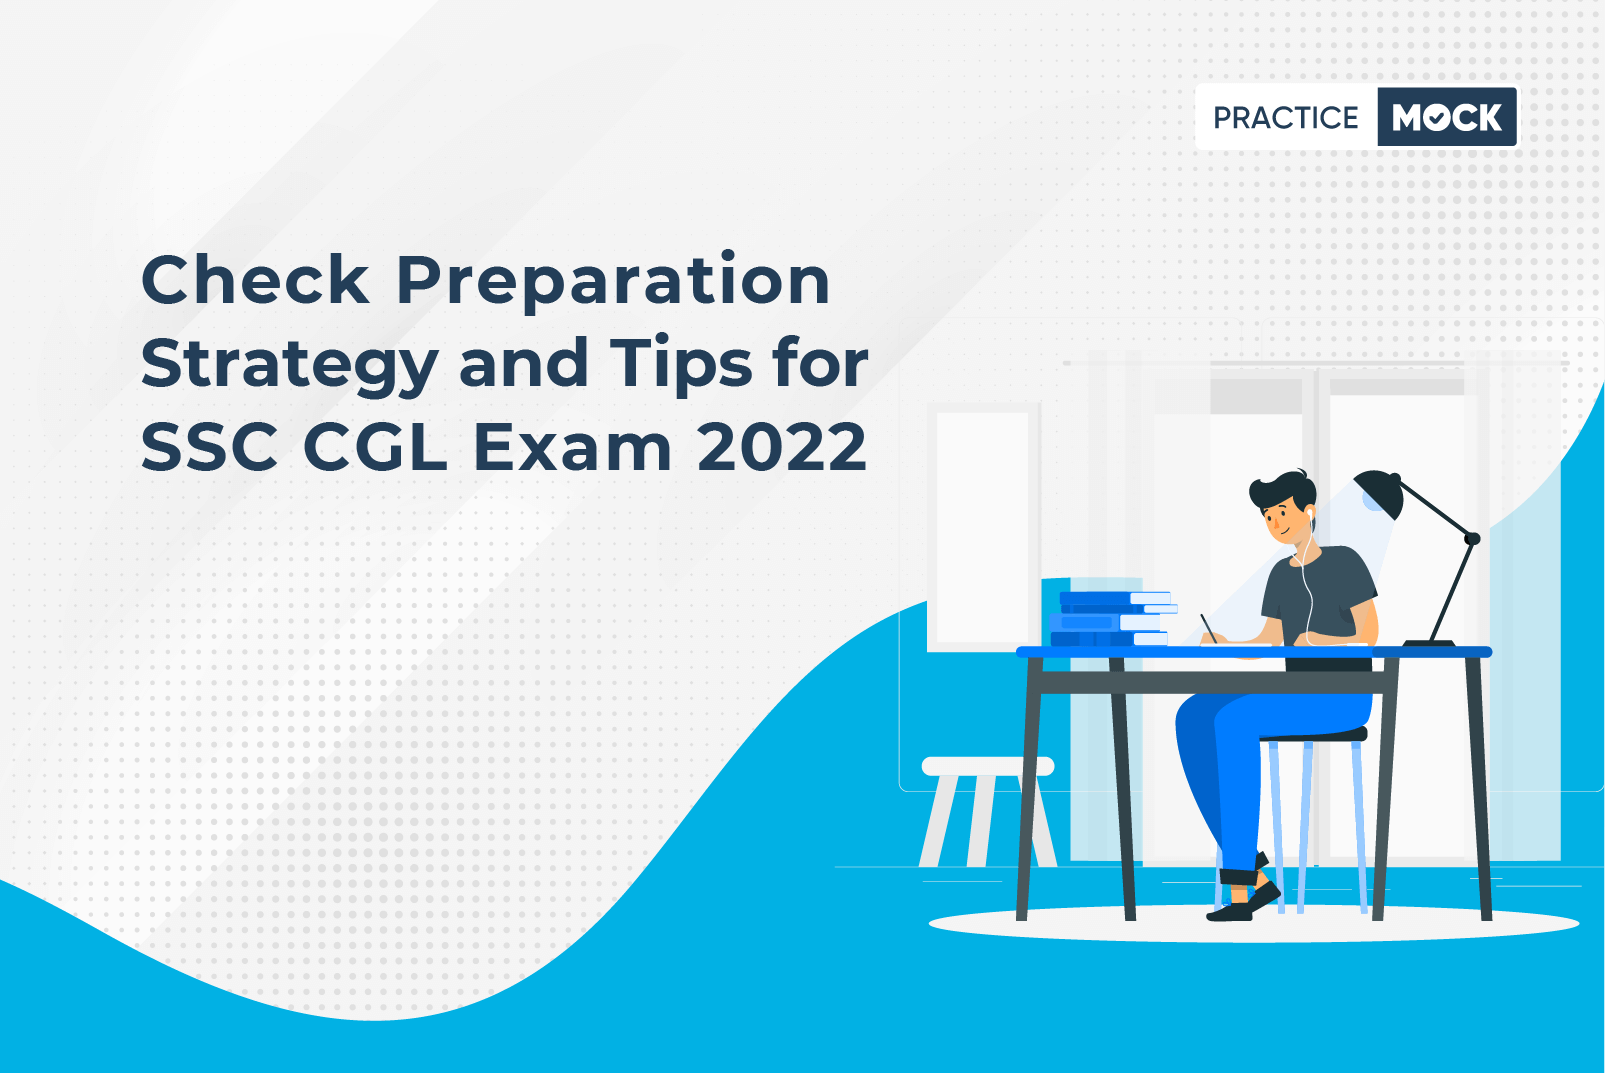 How to Prepare for SSC CGL 2022? - Tips, Strategy & Study Material